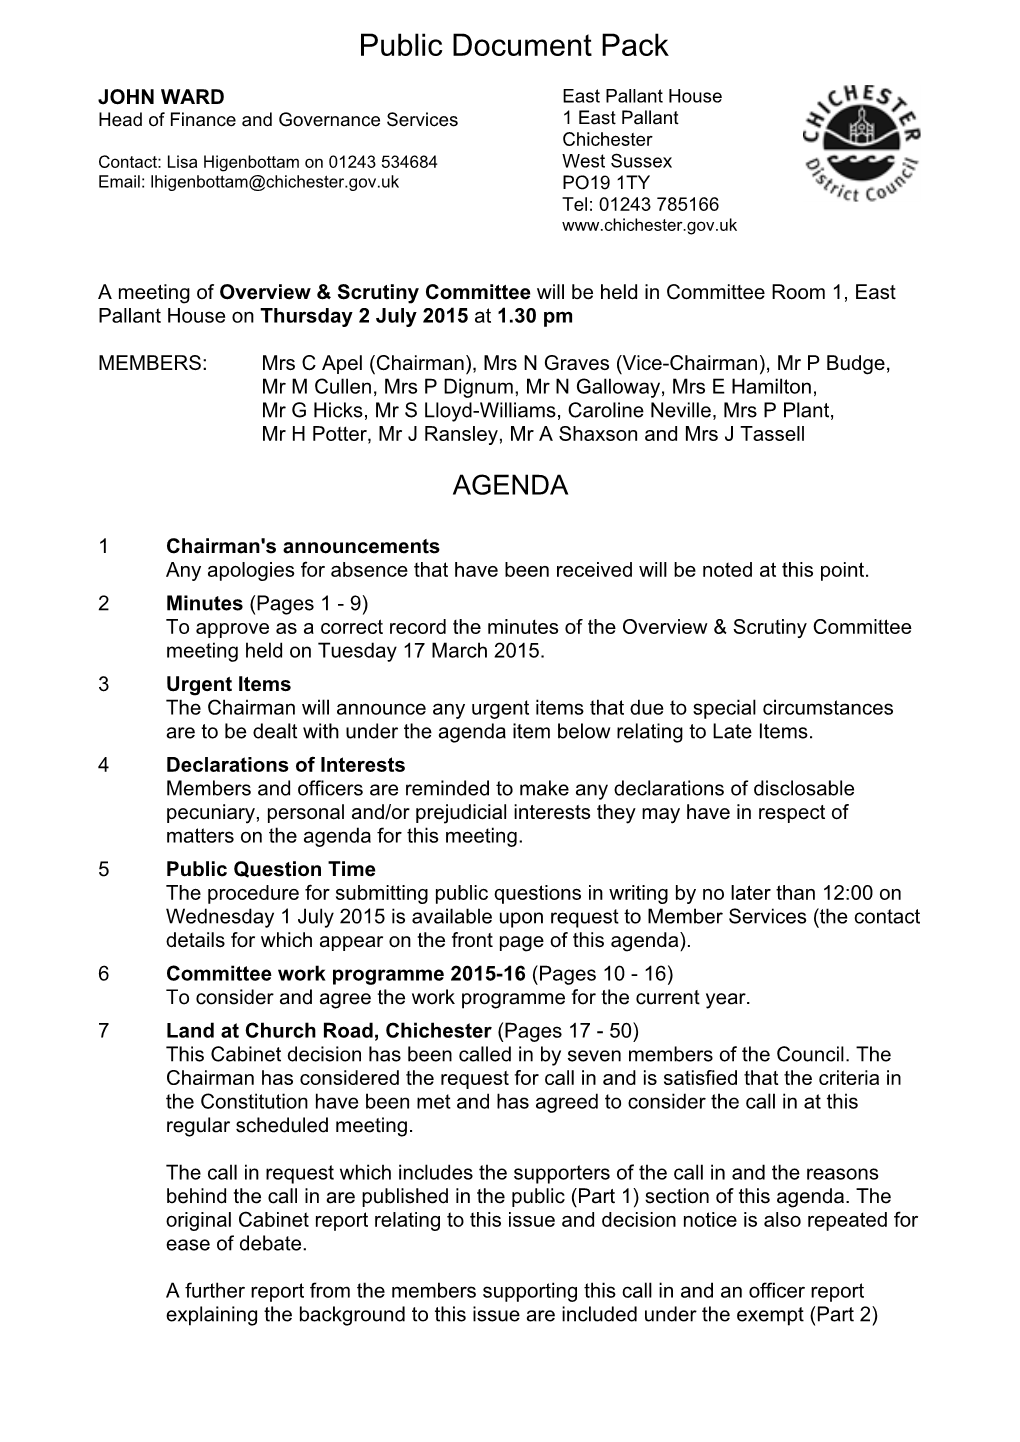 (Public Pack)Agenda Document for Overview & Scrutiny Committee, 02